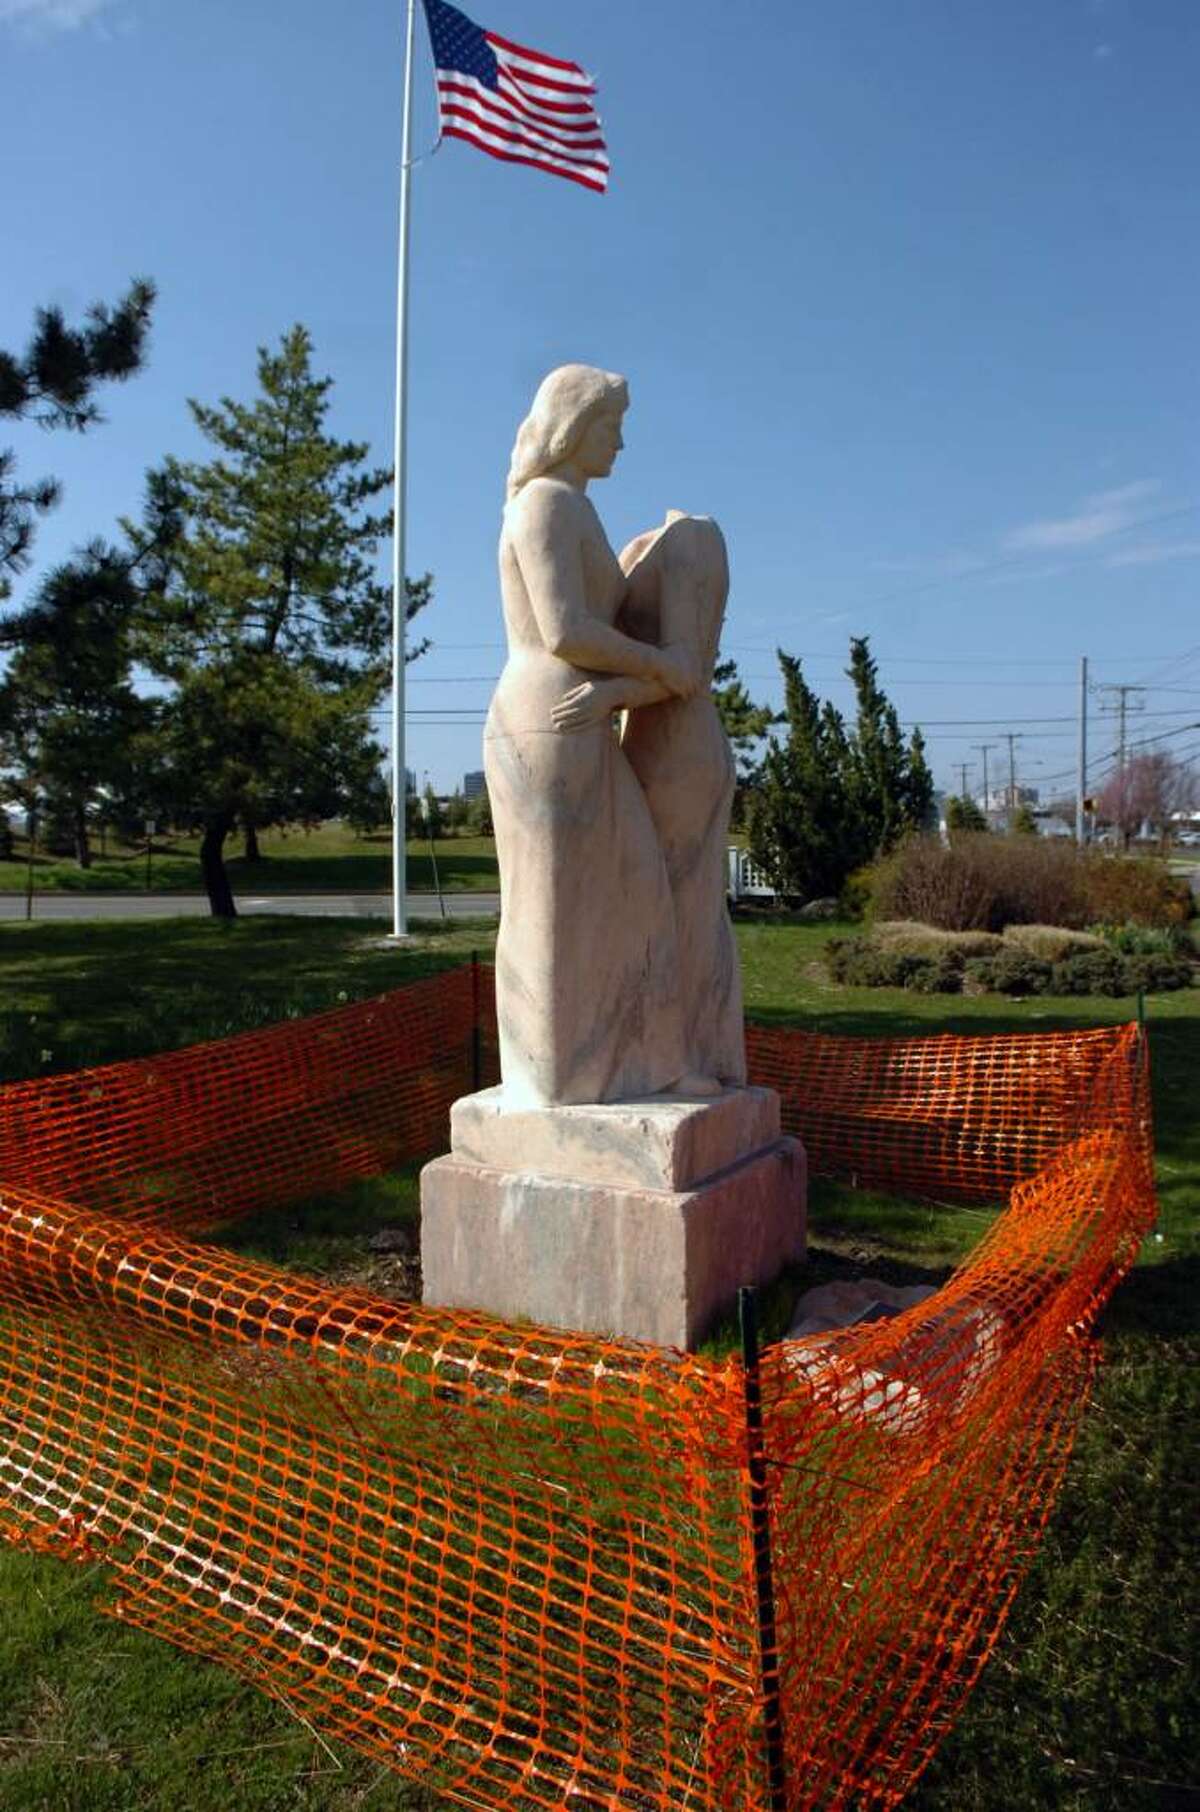 "Neighbors," a depression era statue by Henry Kreis,in Czecik Marina Park is fenced off Monday afternoon, April 5, 2010. The statue was damaged when the head of one of the women was cut off and taken. The work depicts two women embracing and was funded by the Works Progress Administration, an agency created to generate jobs in the late 1930s.